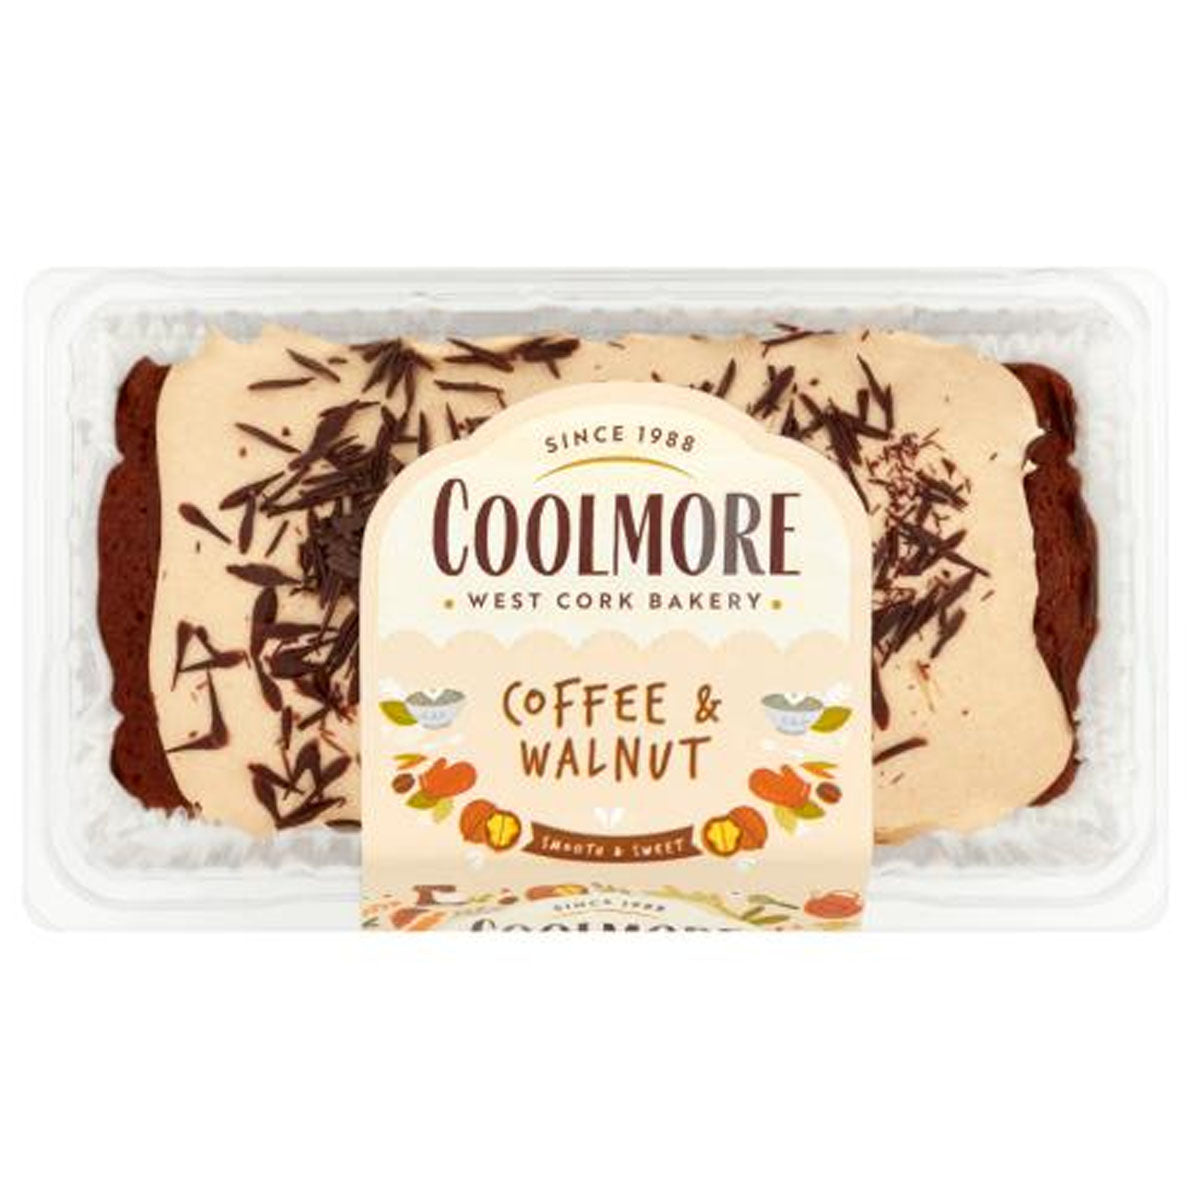 Coolmore - Coffee & Walnut - 400g - Continental Food Store